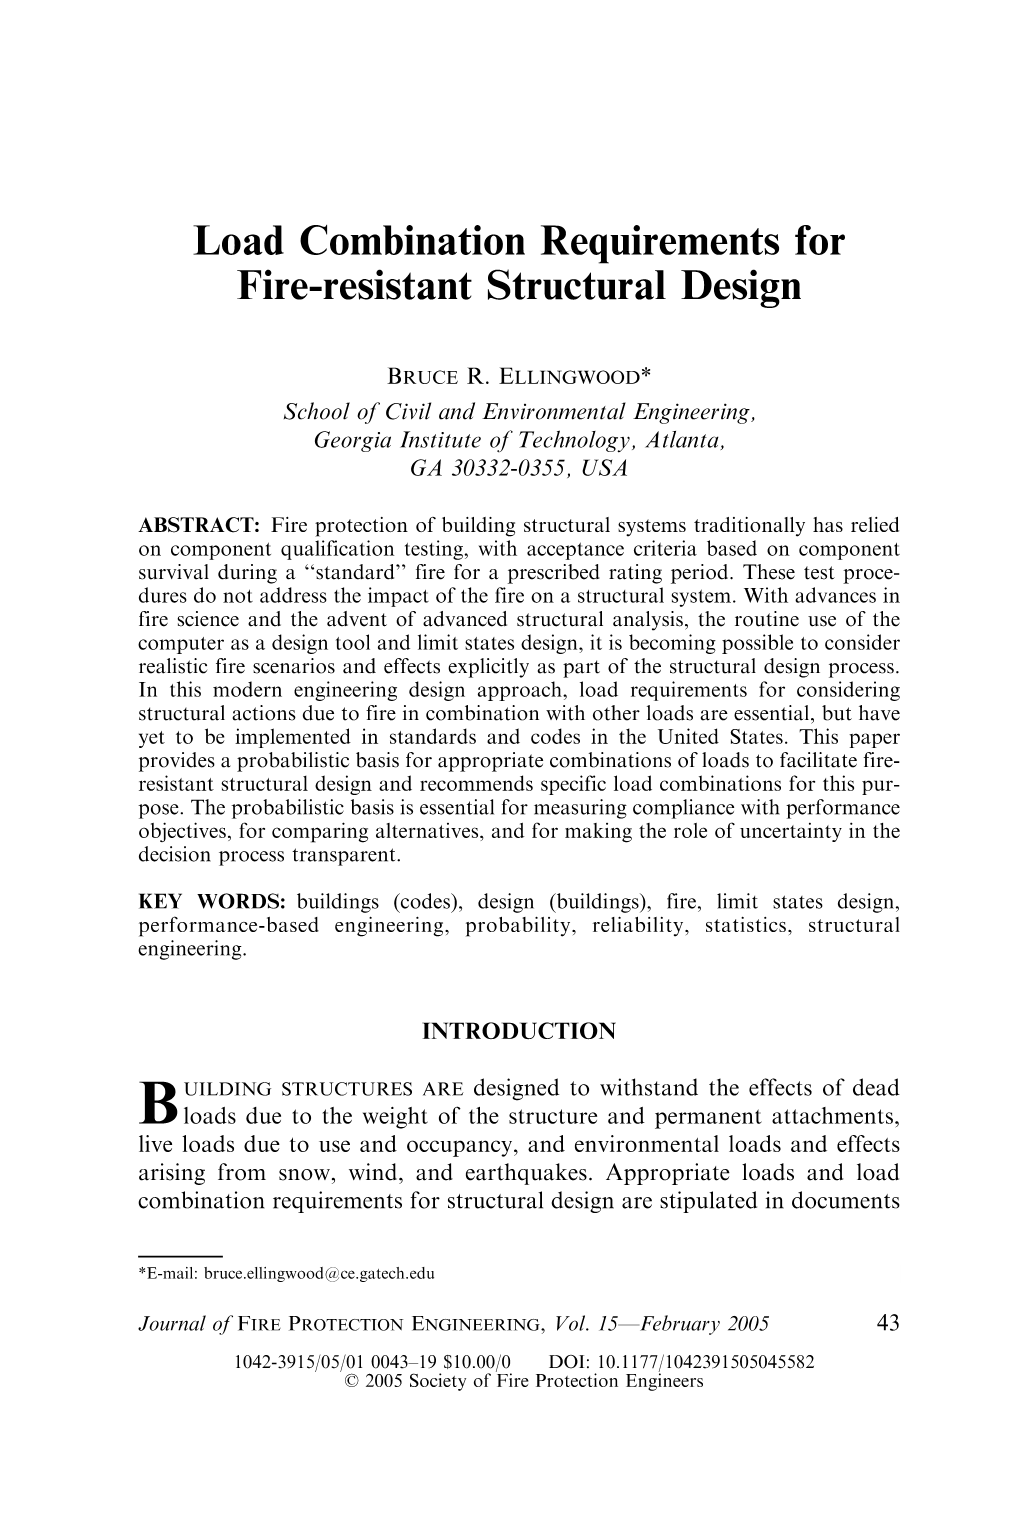 Load Combination Requirements for Fire-Resistant Structural Design